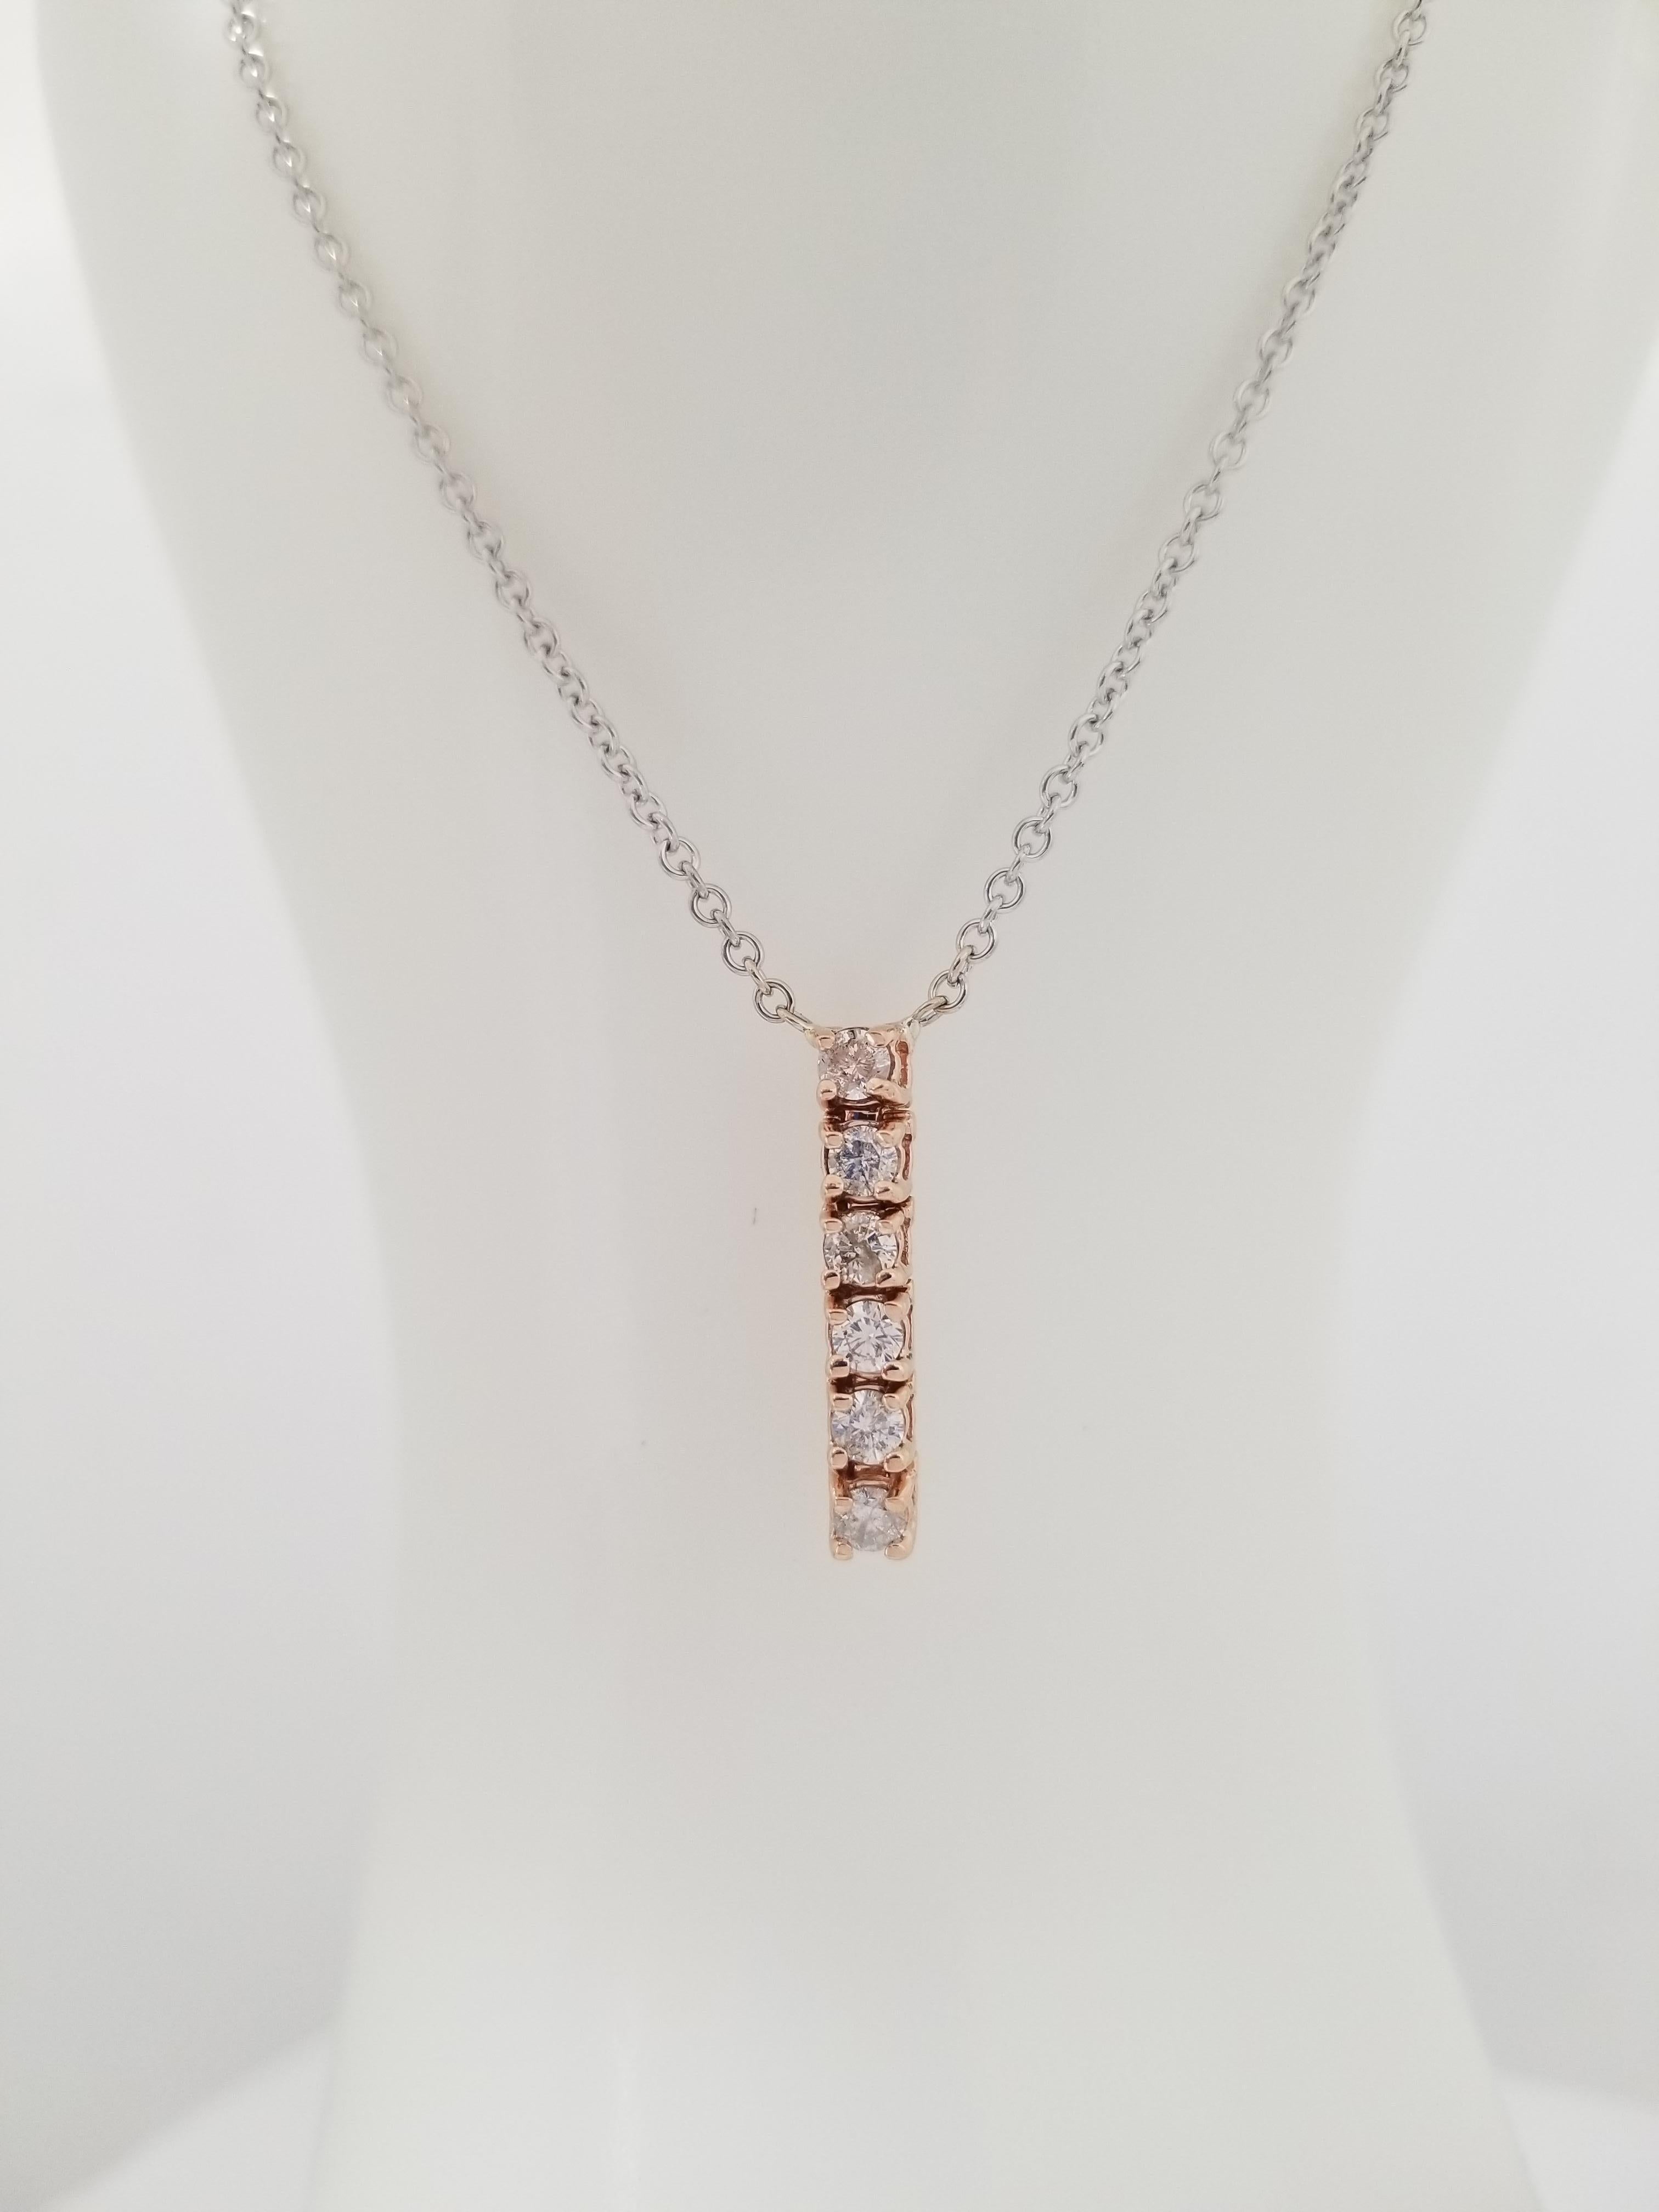 Adorable 0.45 cttw rose gold pendant 14k attached to 16 inch white gold chain, Average Color I, Clarity SI, All natural diamonds. Lobster clasp. 